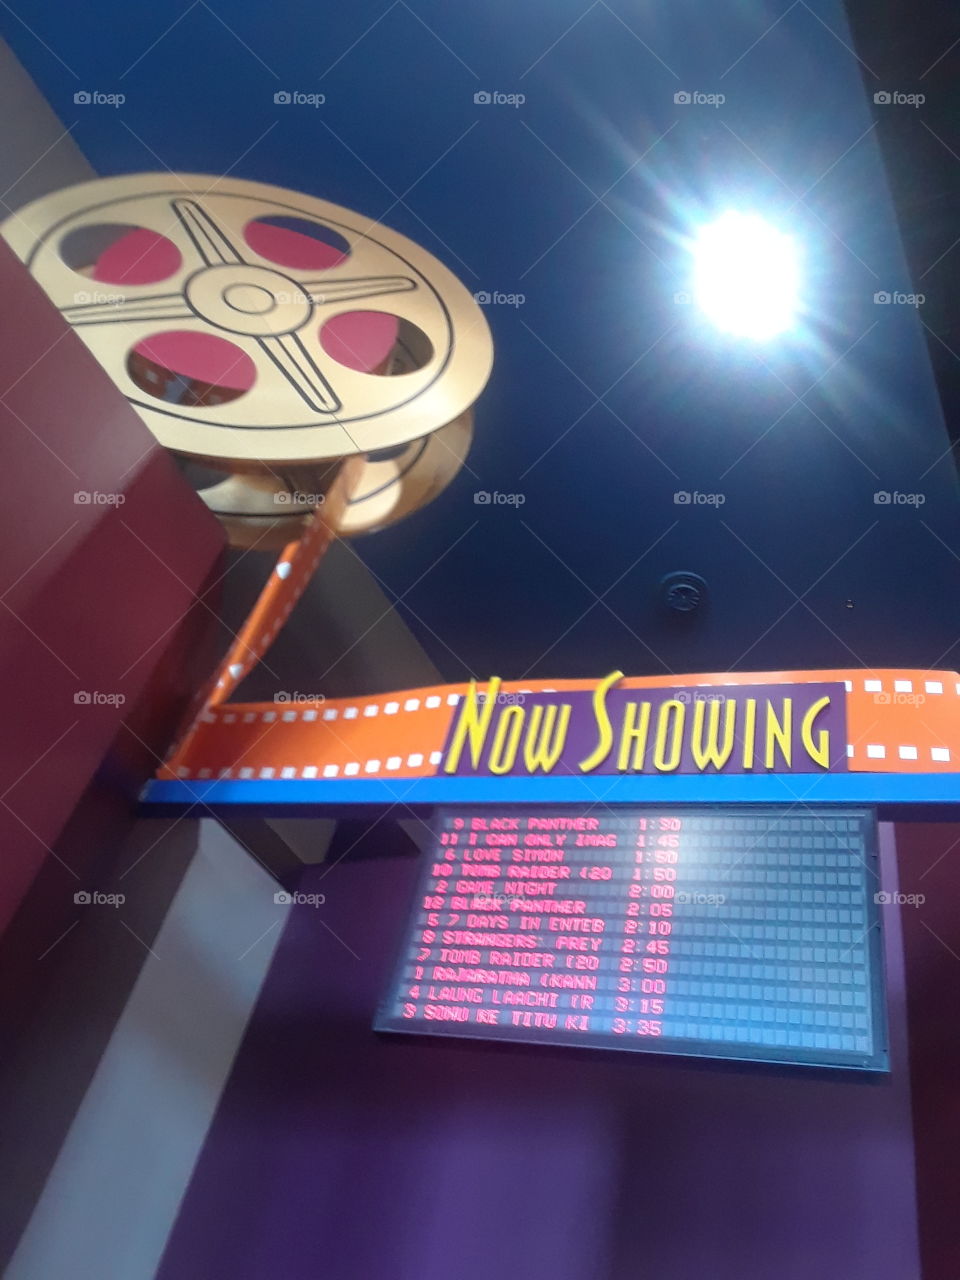 now playing for your grand movie.Film work.watching a great movie to keep u occupied and busy with life.i get in free haha lol.Gotta love the theater colors and attraction. nice light to go with it.action photo.